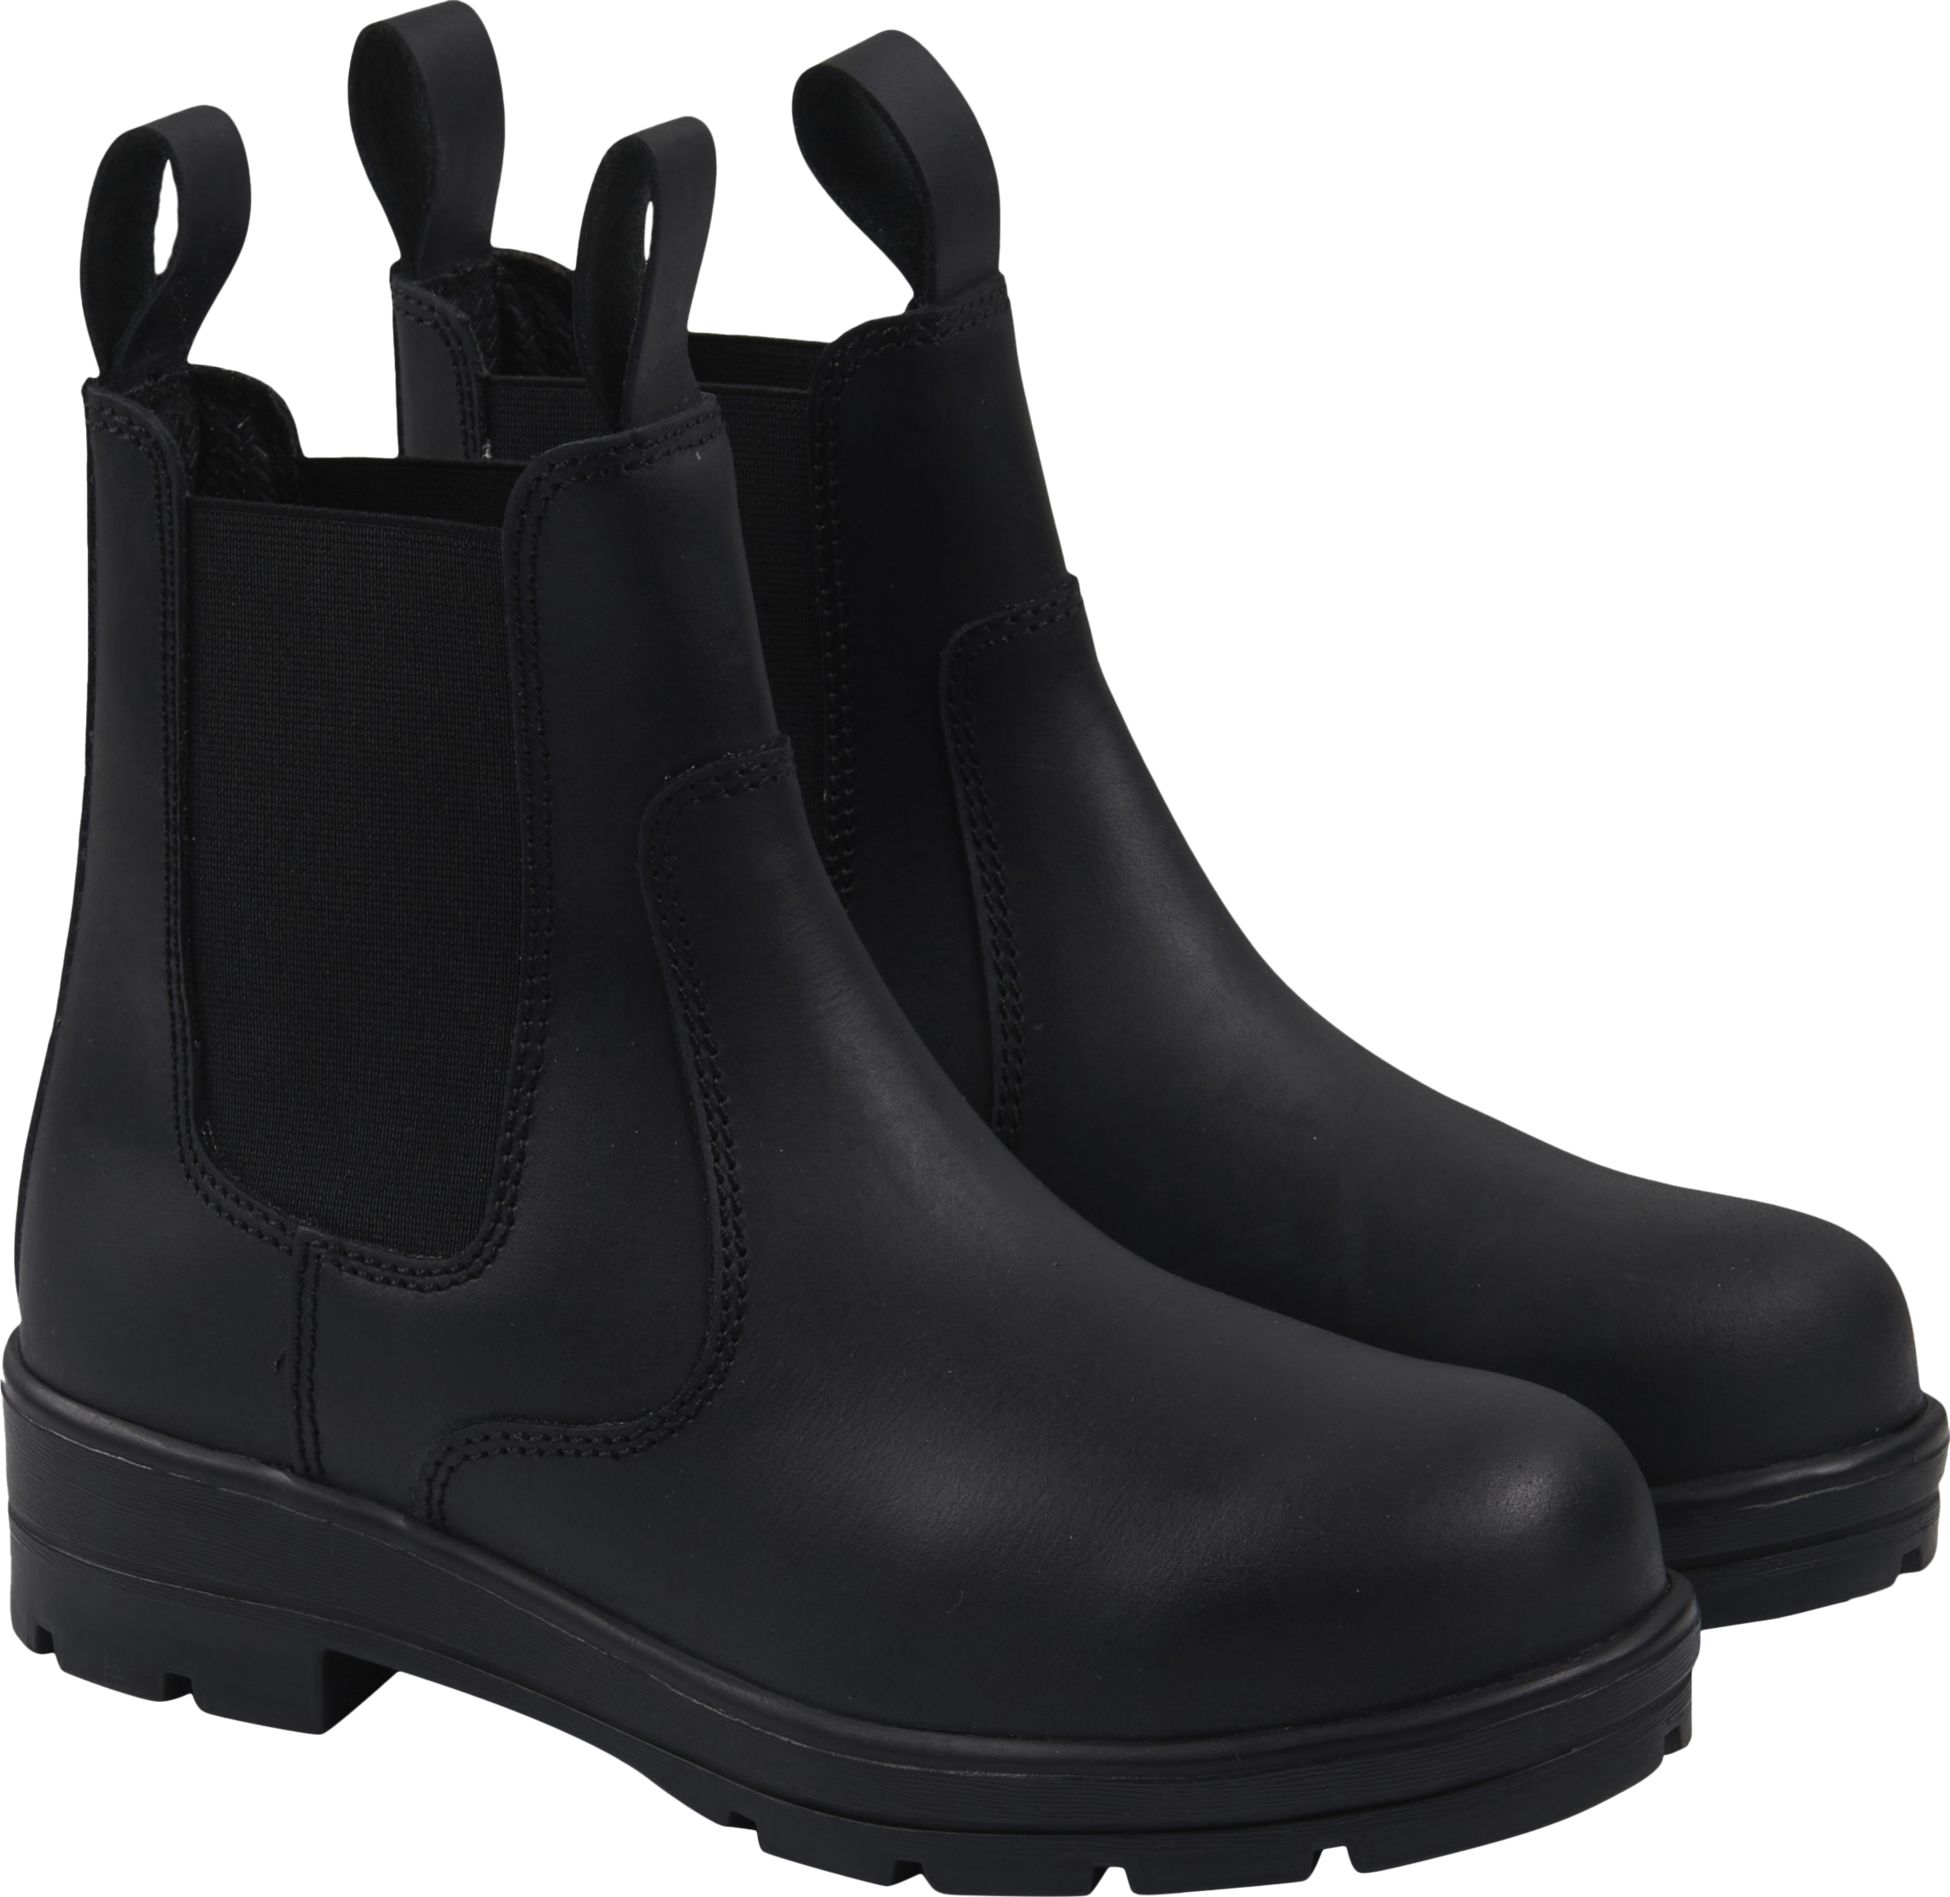 EQUIPAGE, JR SAFETY BOOTS